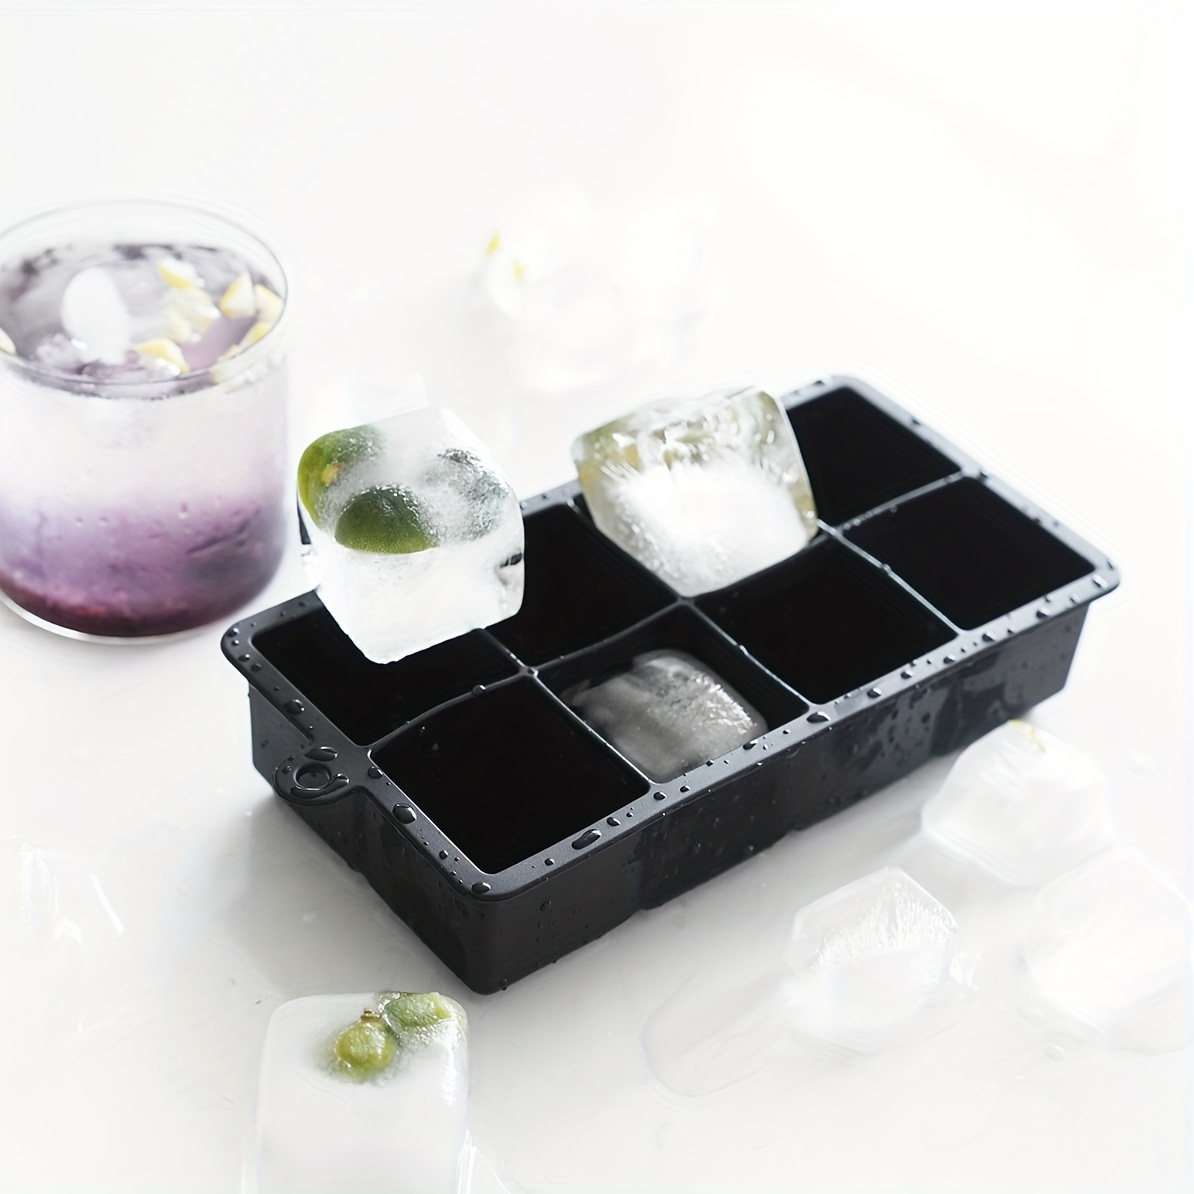 ZZWILLB Ice Cube Tray, 64 pcs Ice Tray with Lid and Bin and Ice